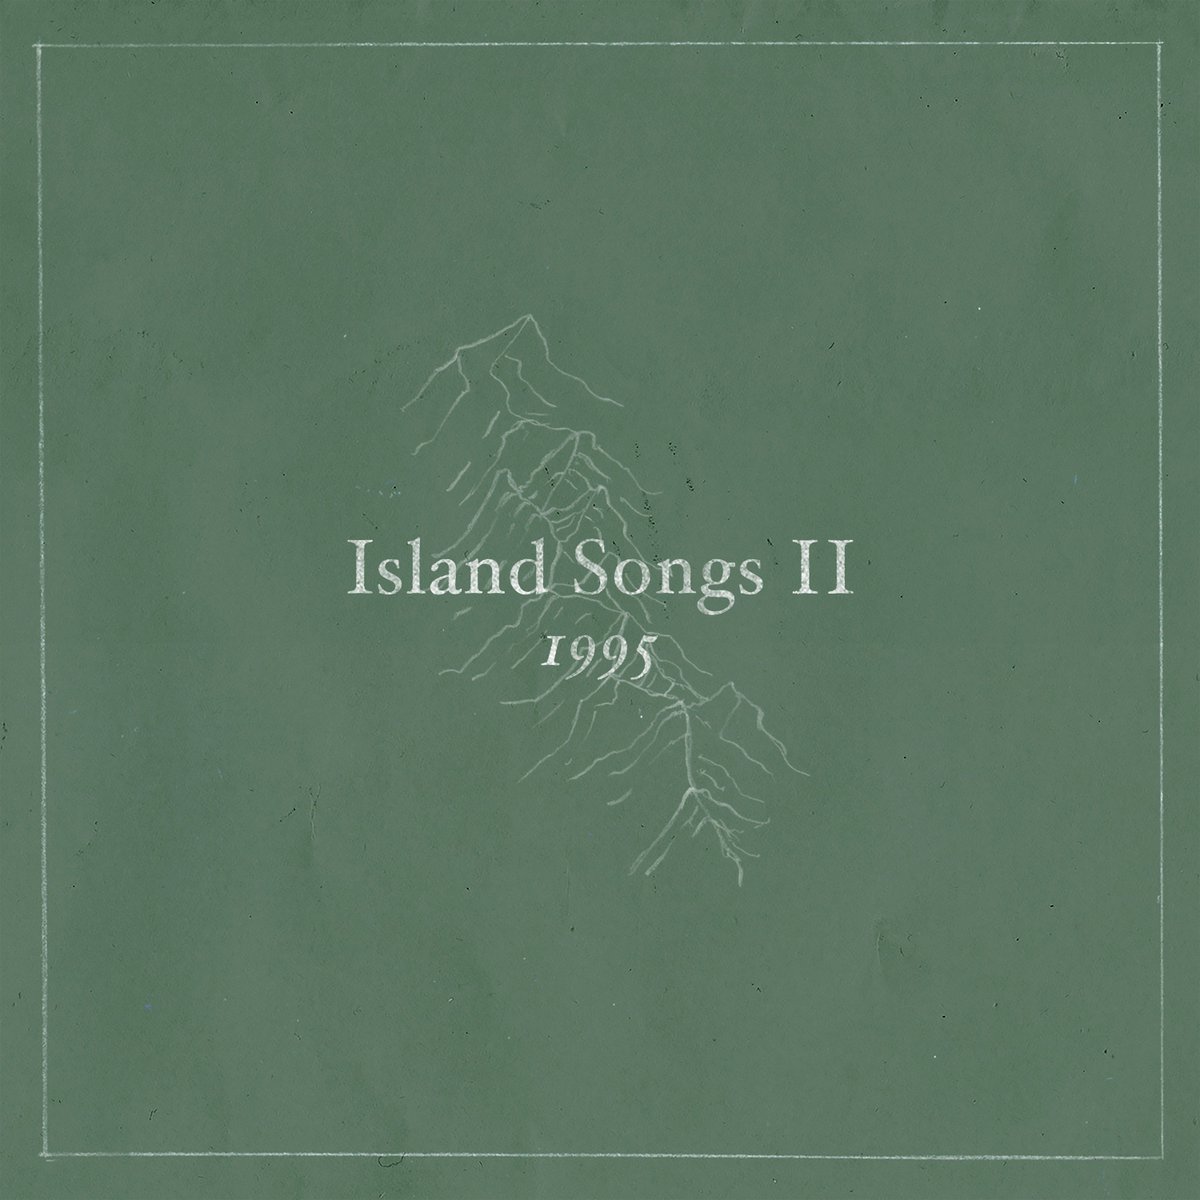 Have you heard the second track from @OlafurArnalds's #islandsongs yet? 
Stream it here: https://t.co/U0oE6nmVpG https://t.co/a5PoAUASJc